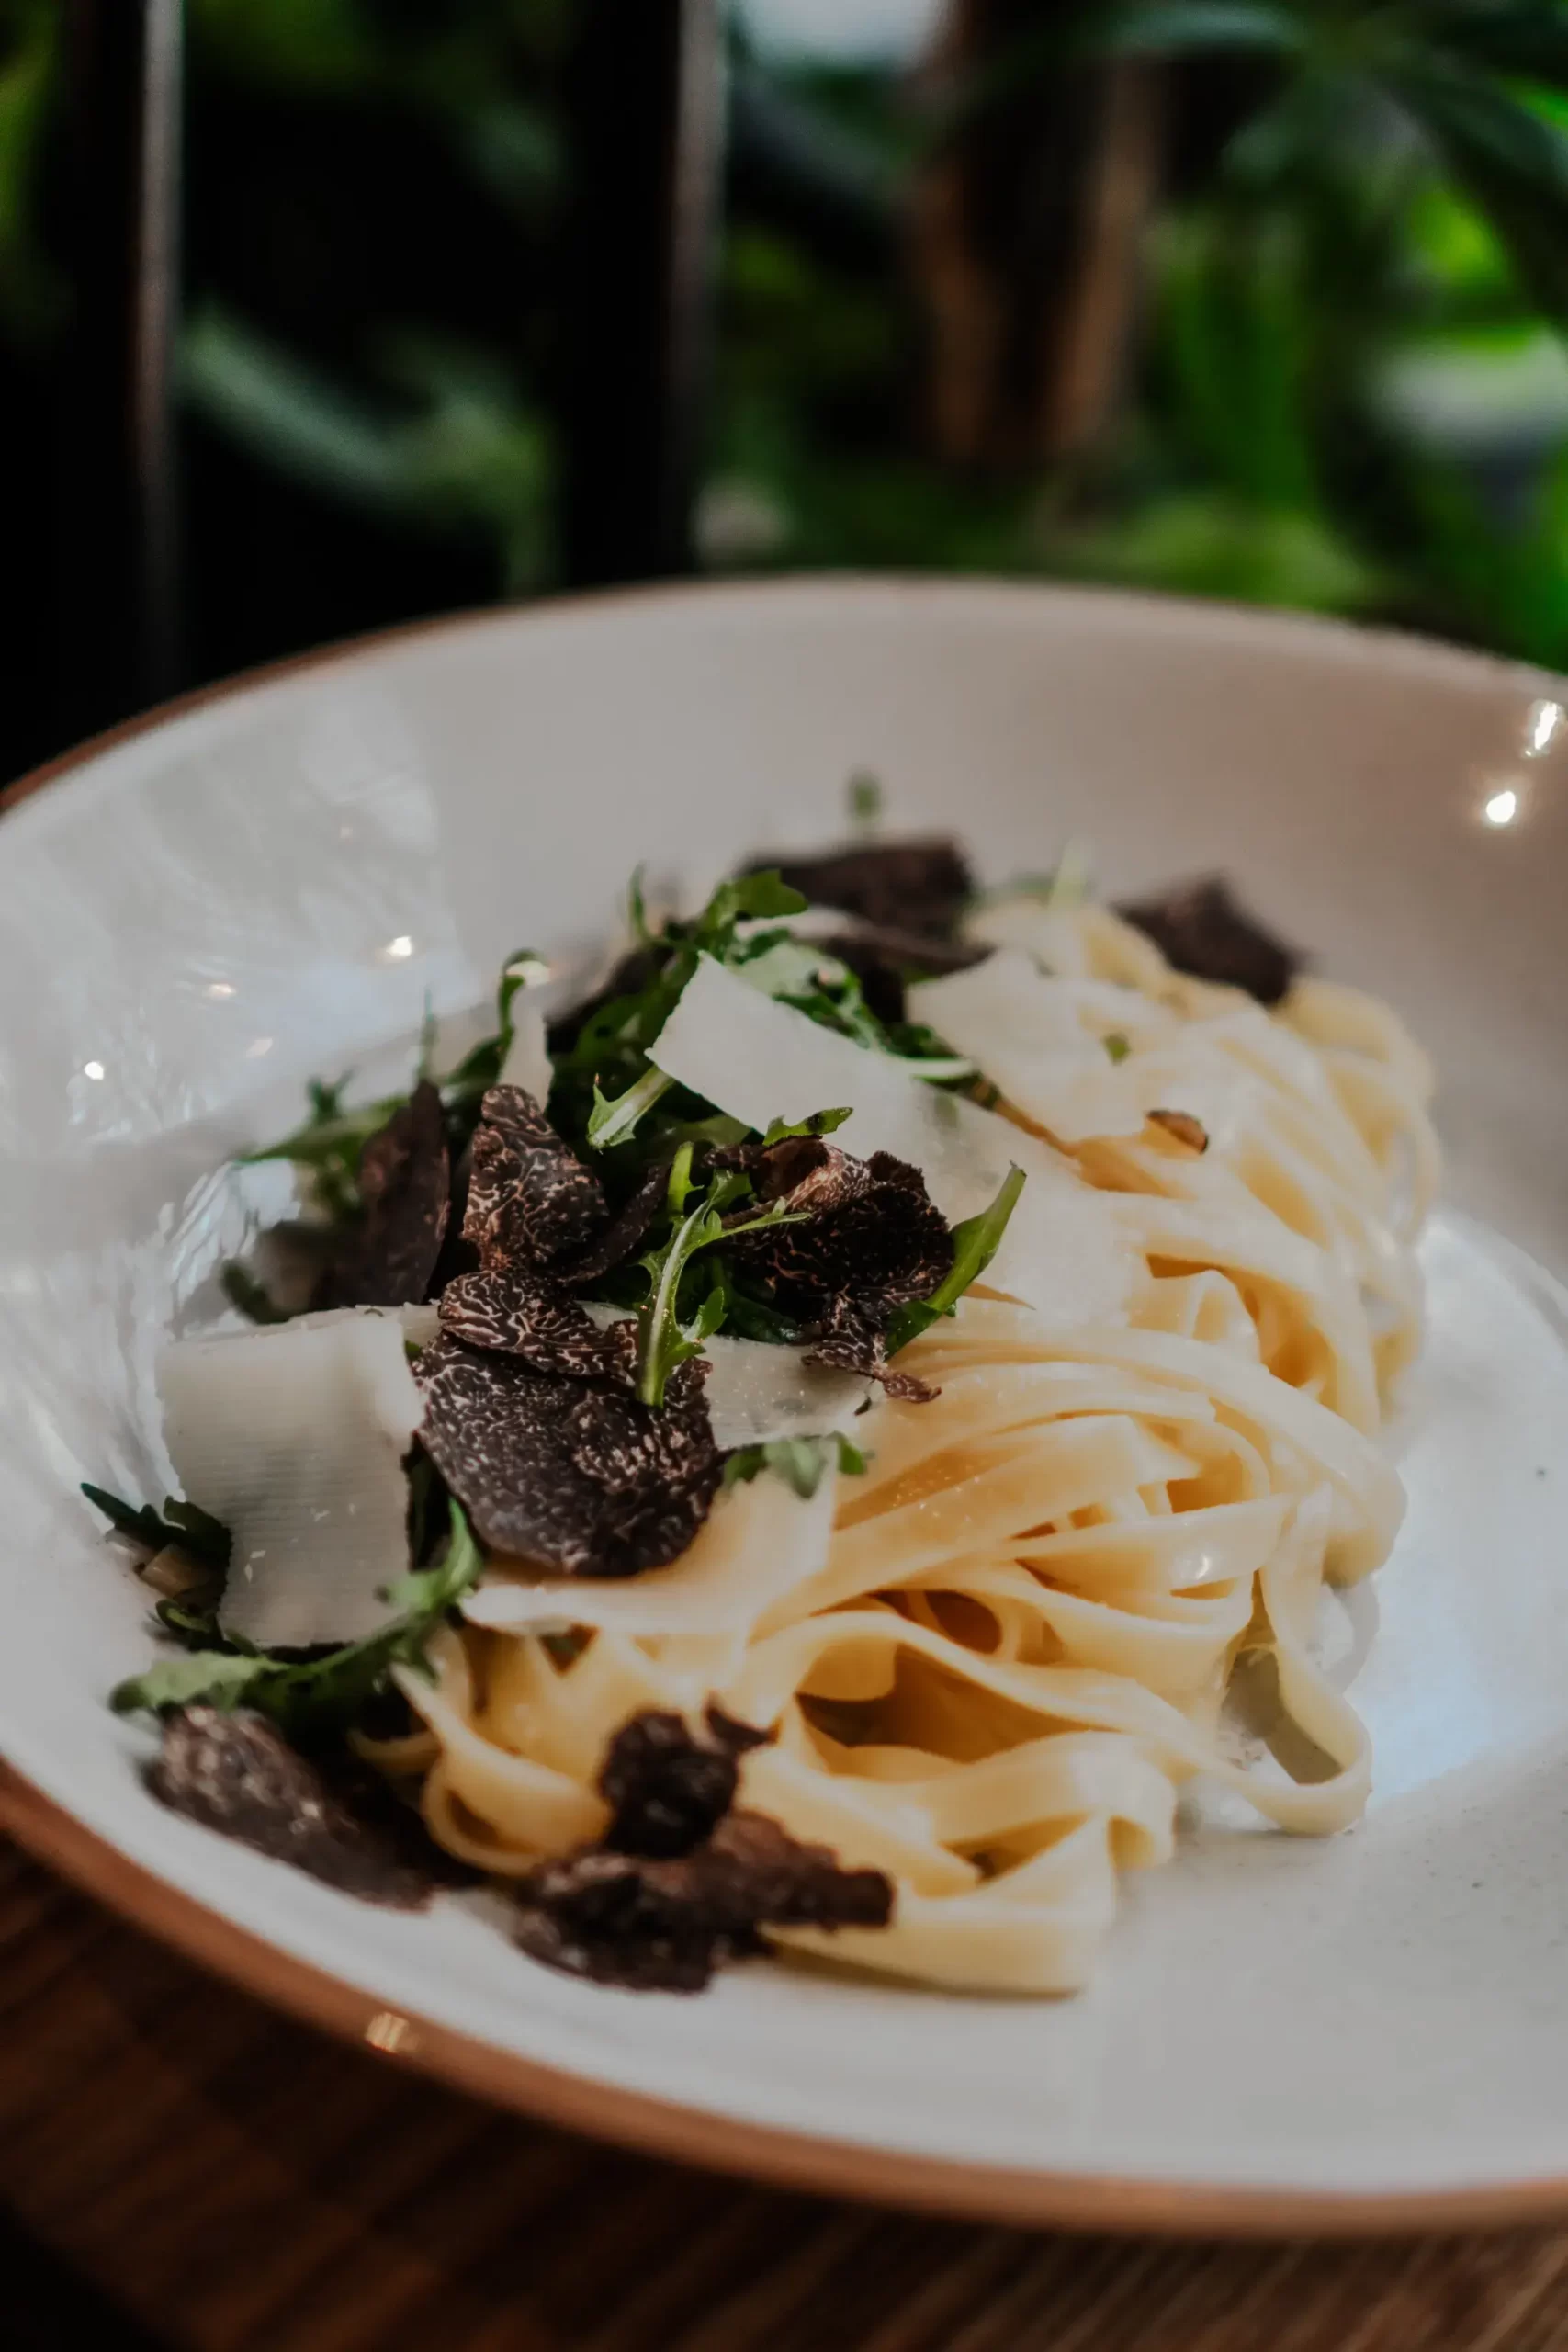 On a white plate is arranged tagliatelle with fresh truffle cut into thin slices, arugula and sliced Parmesan cheese.